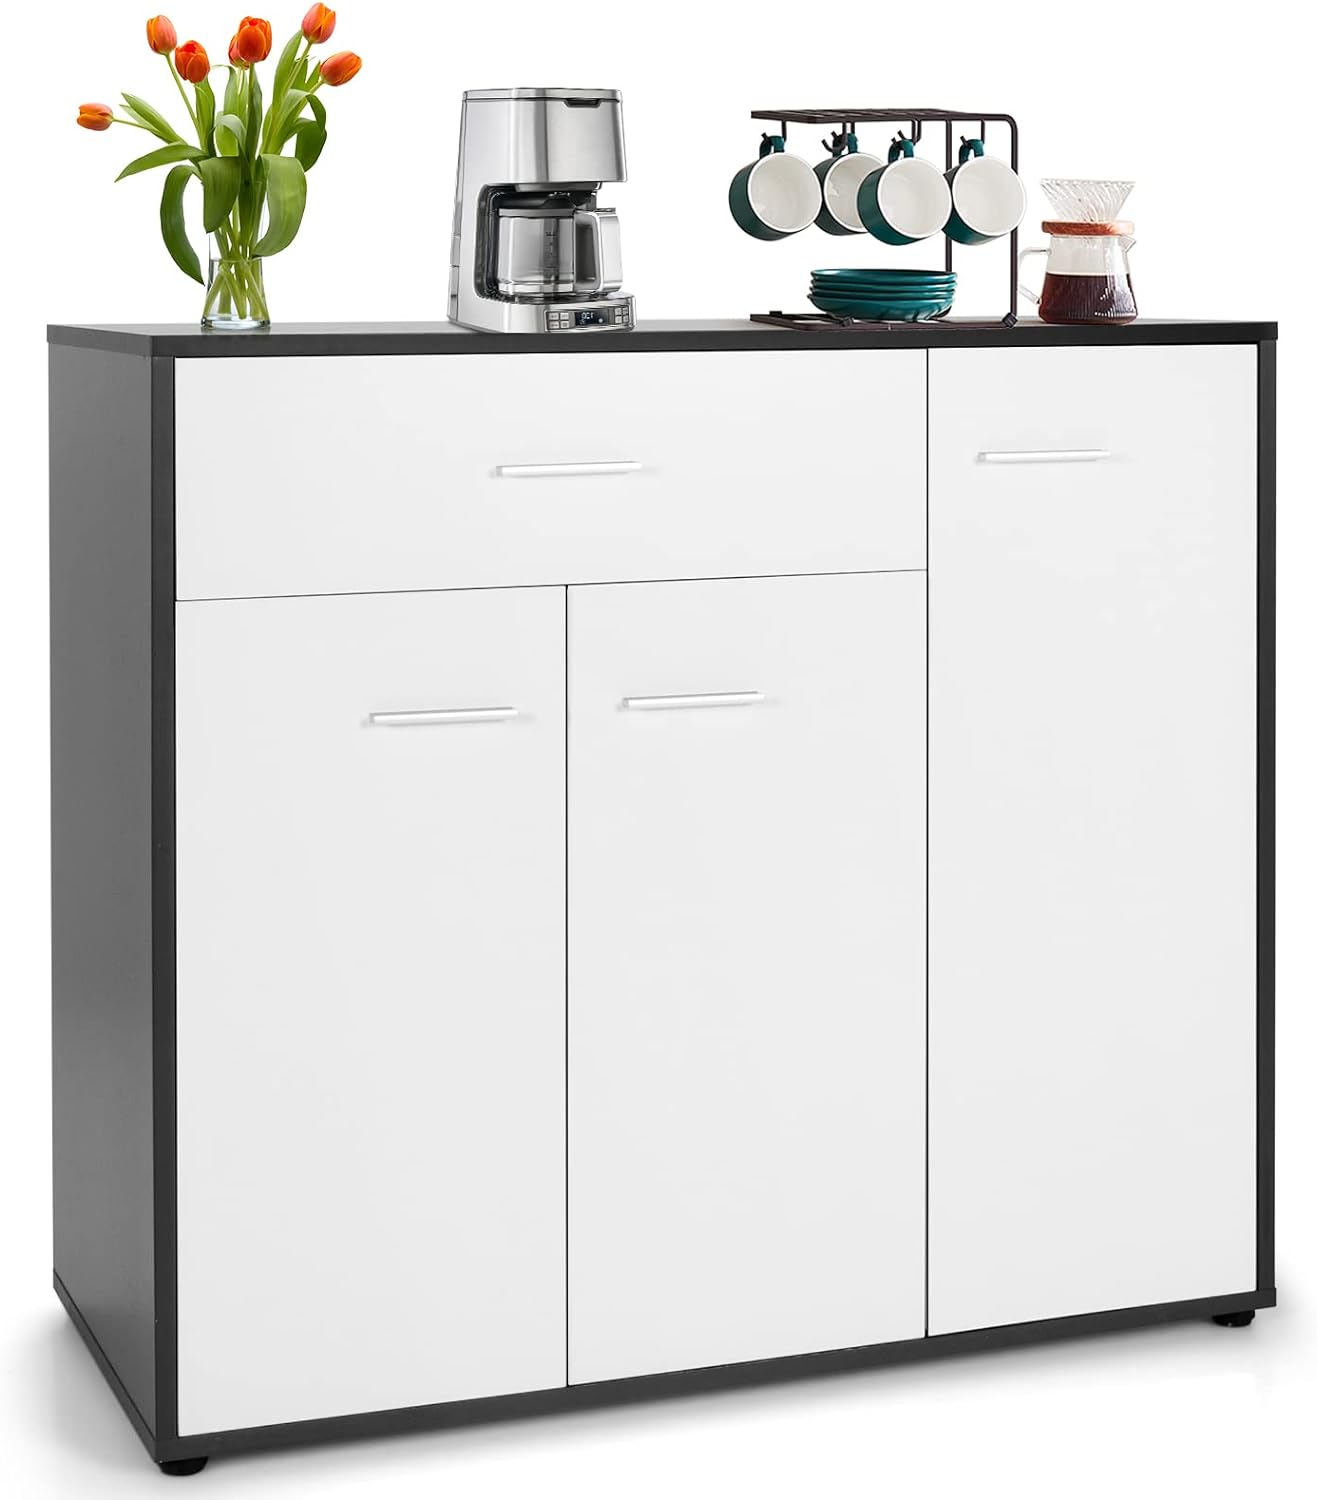 COSTWAY Buffet Sideboard Storage Cabinet, White Kitchen Sideboard with Spacious Table Top, 2 Door Cabinets, Large Drawer, Adjustable Shelf, Anti-Toppling Device, Console Cupboard for Home Living Room